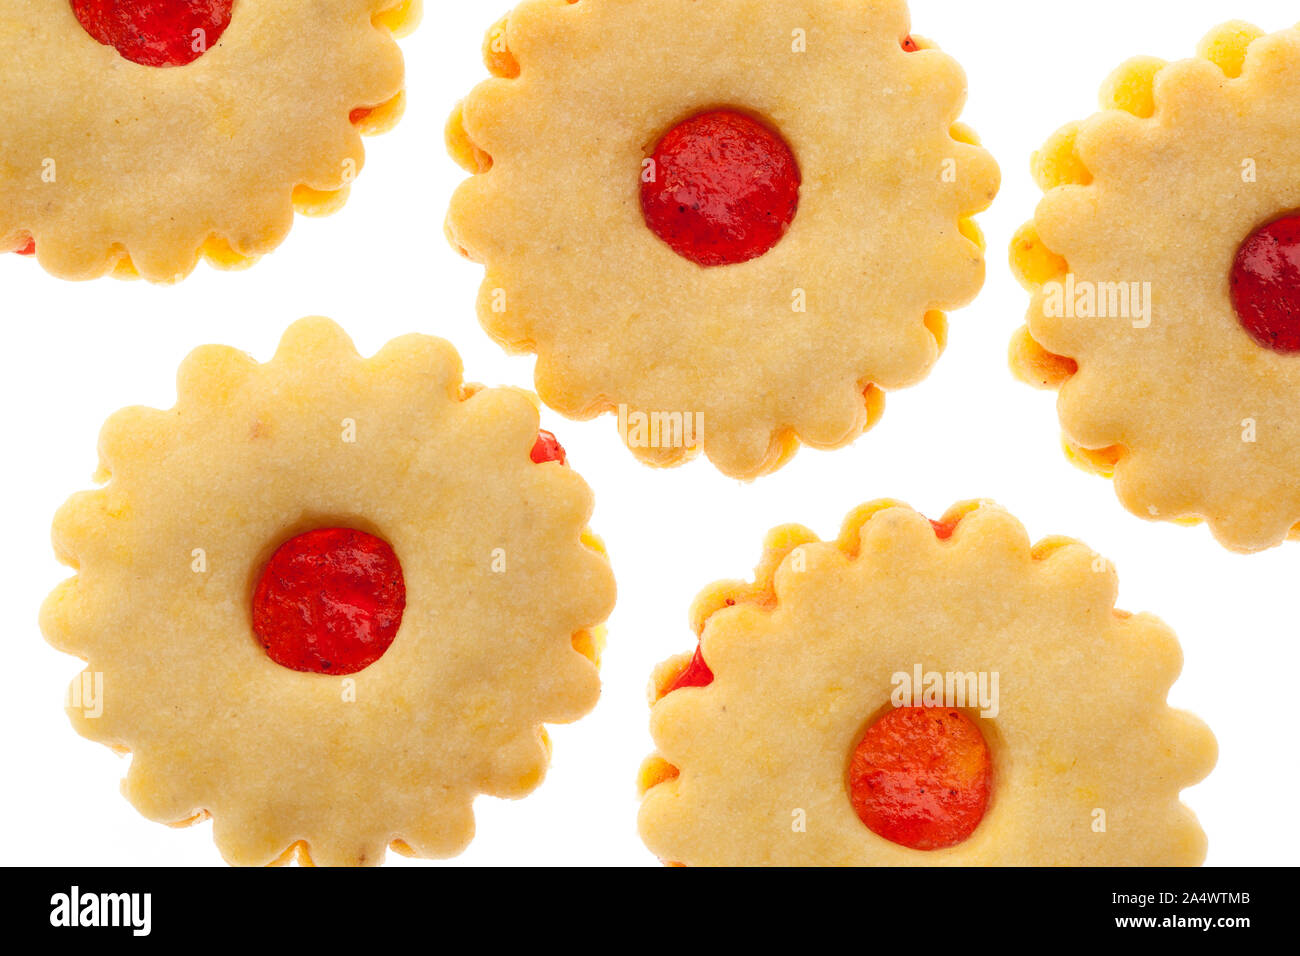 christmas bakery: Several cookies from above on white background Stock Photo